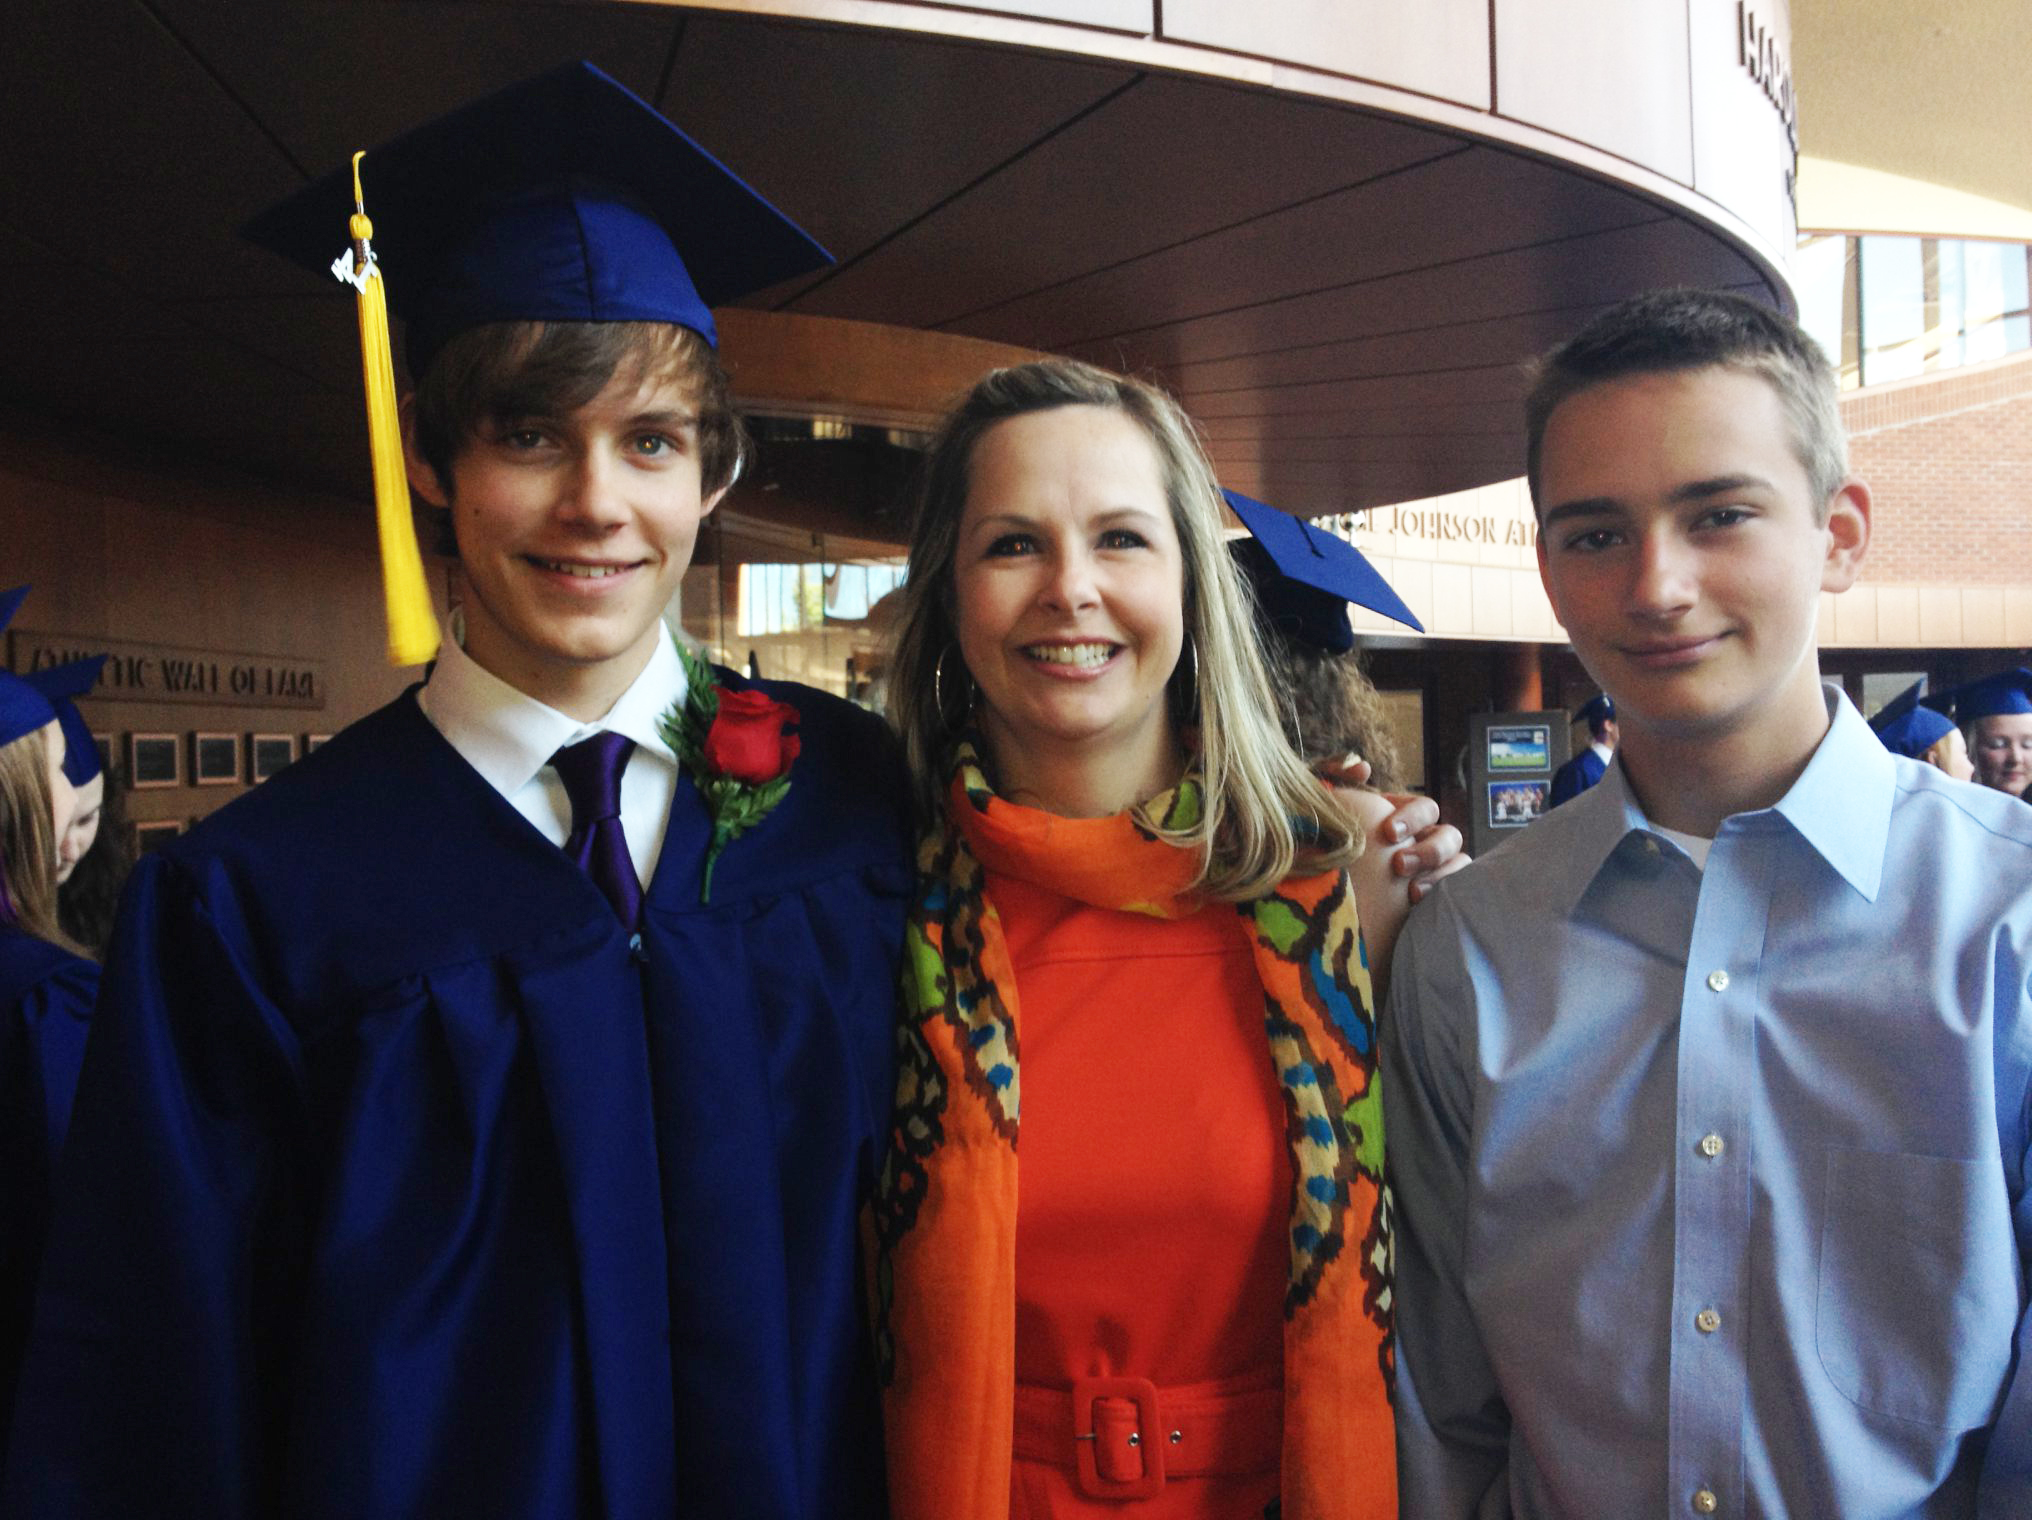 Robbie Granger with a graduation cap stands next to his mother Kim Granger and brother.